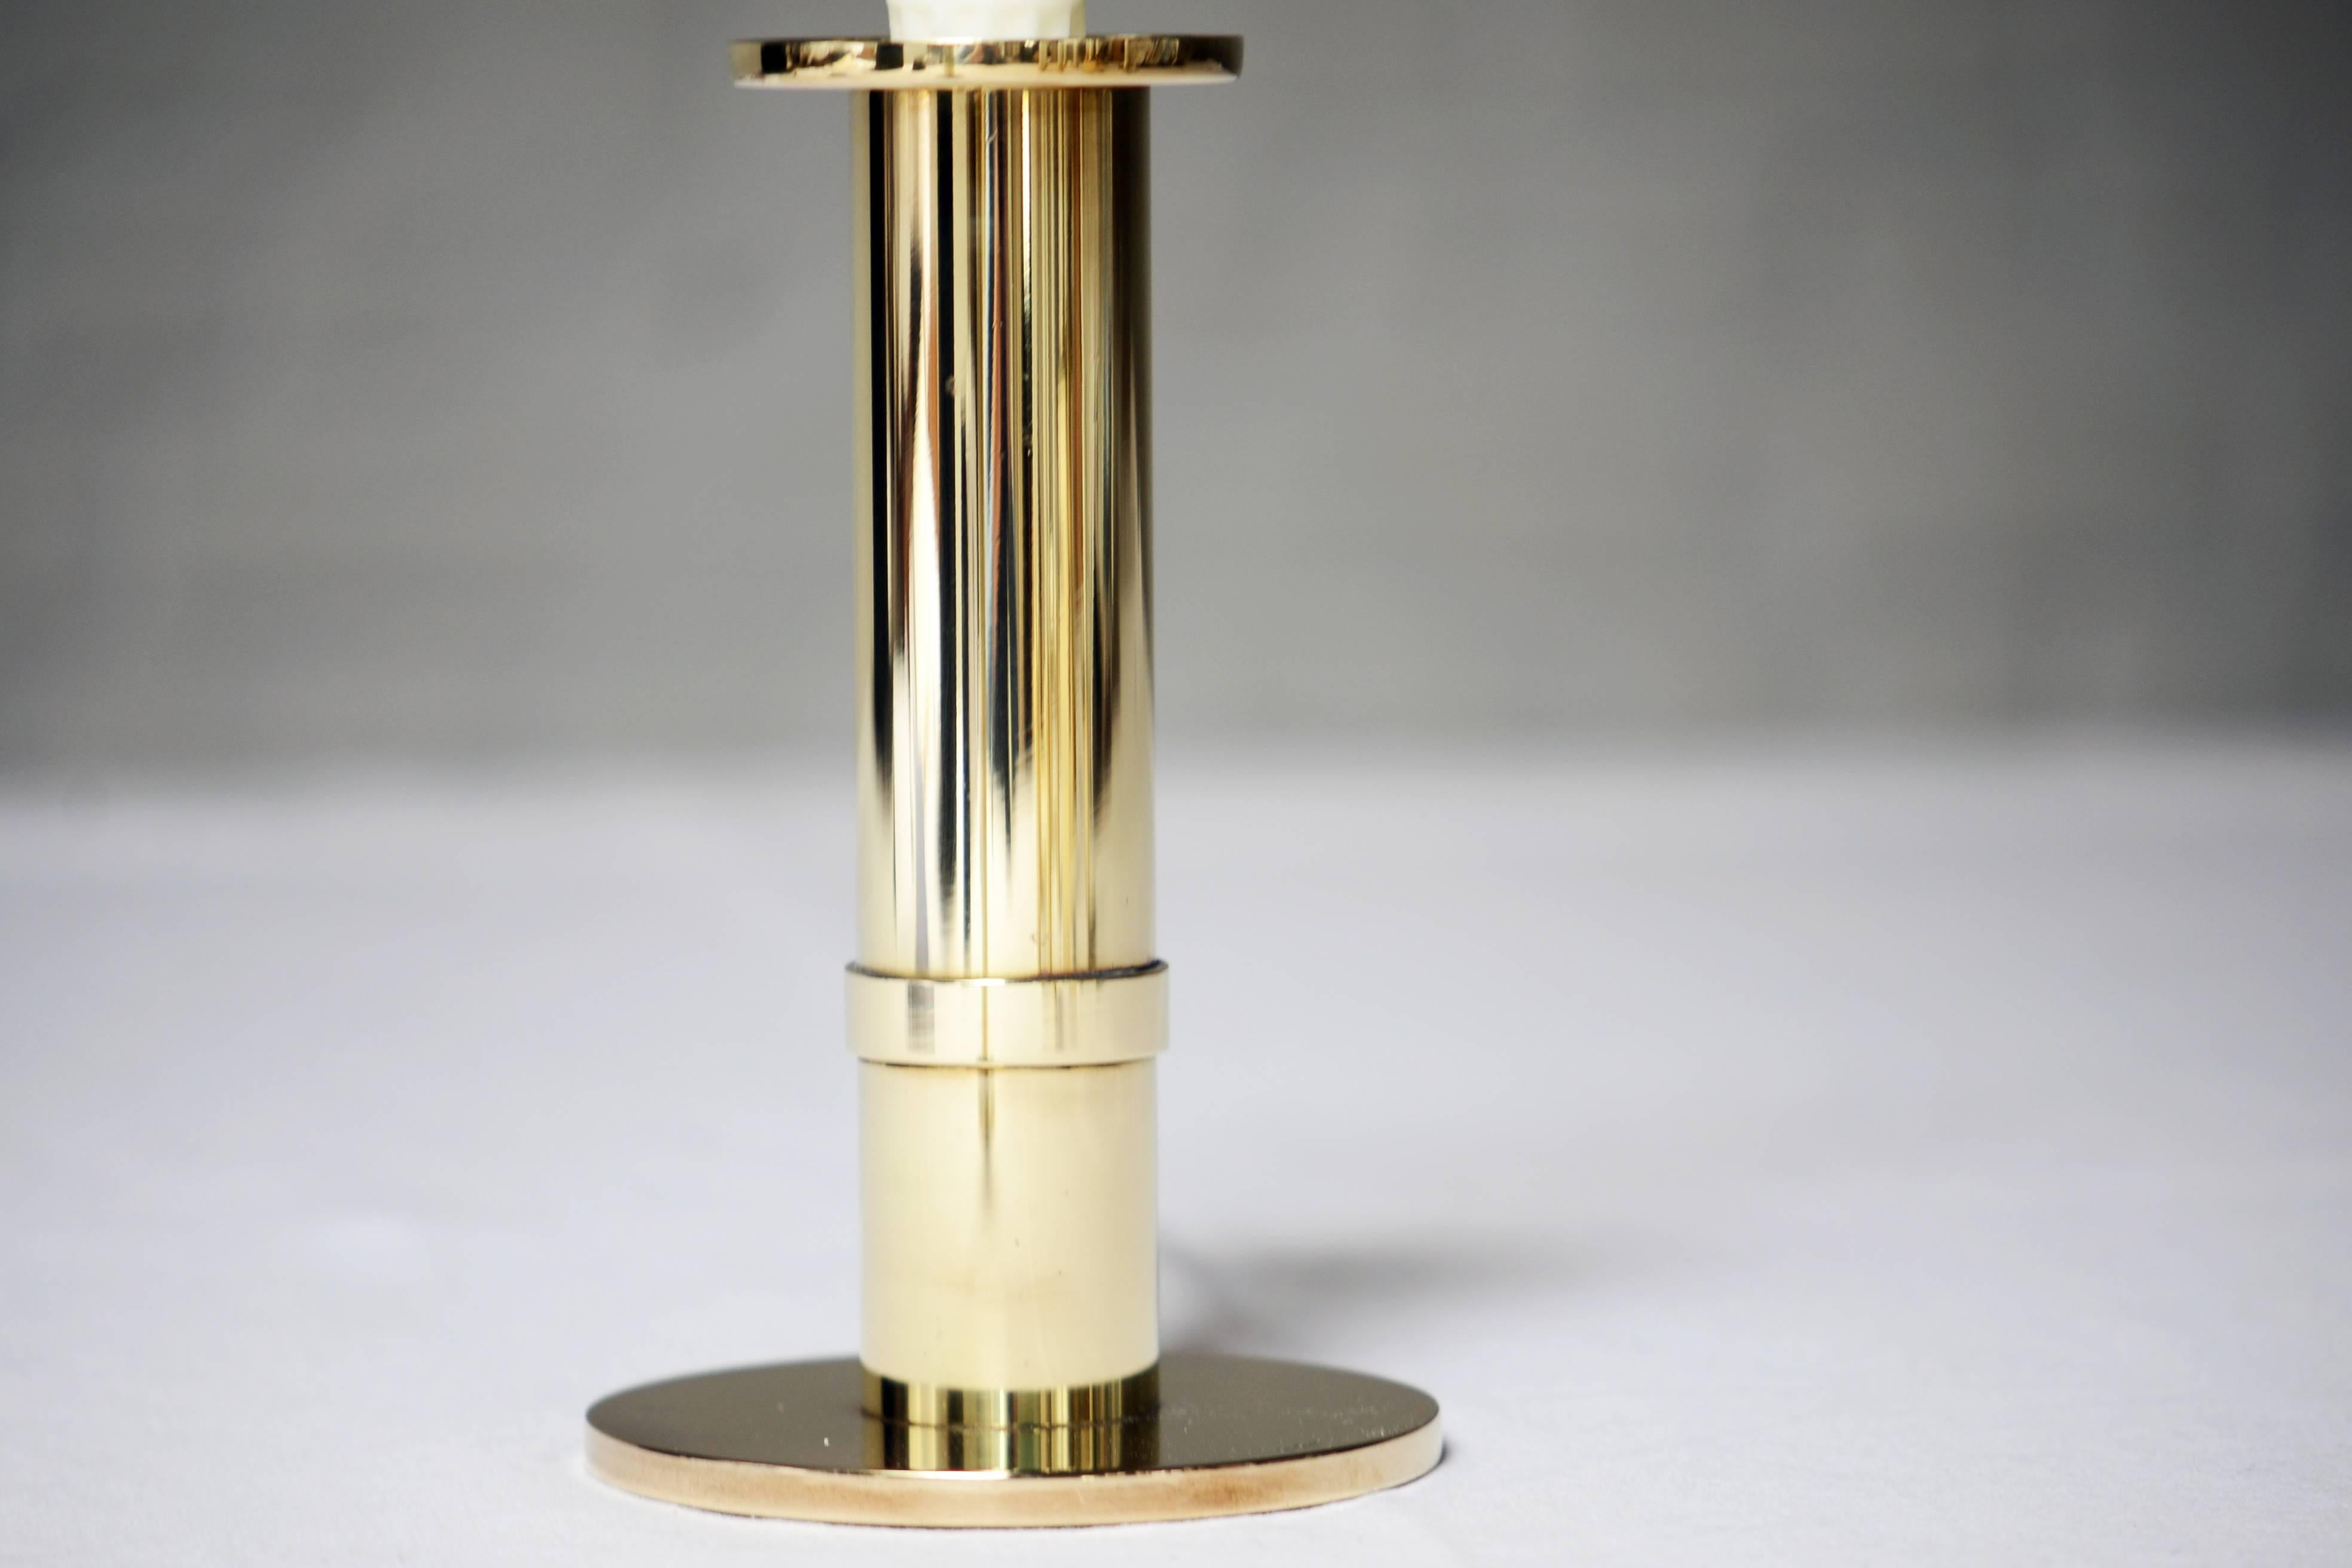 Pair of brass candlesticks.

Sigurd Persson, (1914-2003).
Sigurd Persson began as a silversmith, but over a long path constantly tried new genres and among other things, worked as a glass artist, designer and sculptor. During the 1950 and 1960